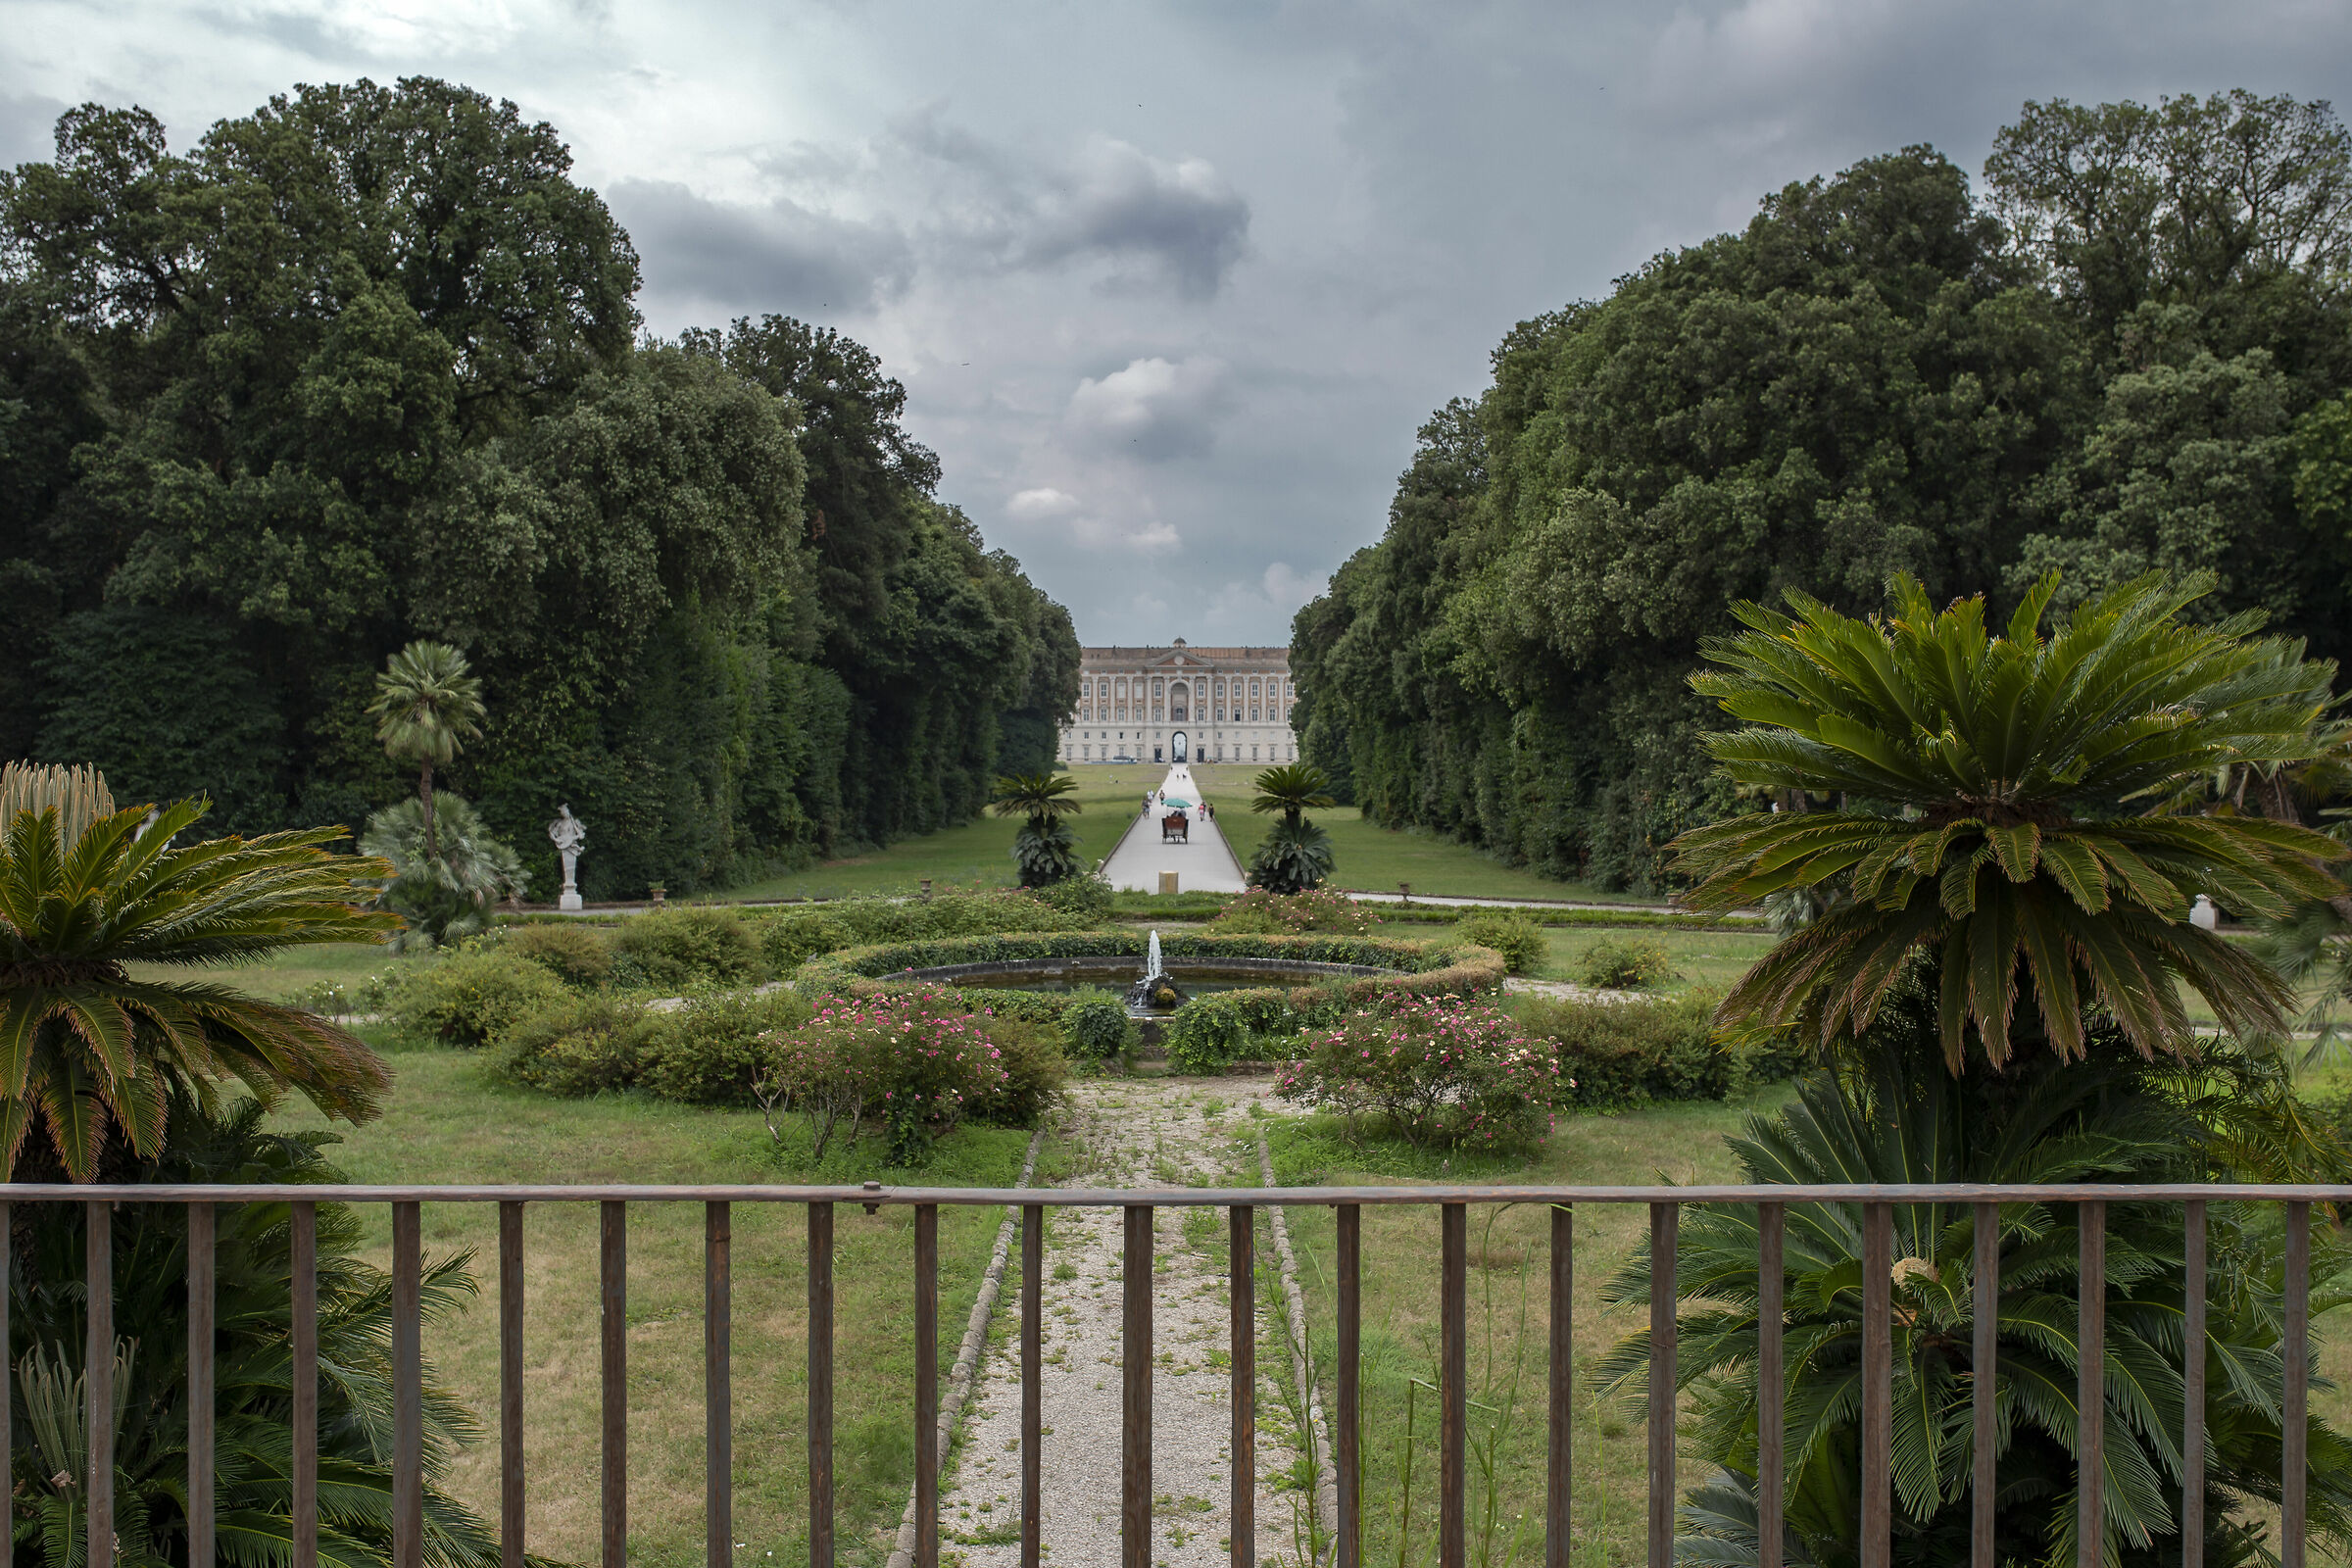 The gardens of the Palace ofCaserta...